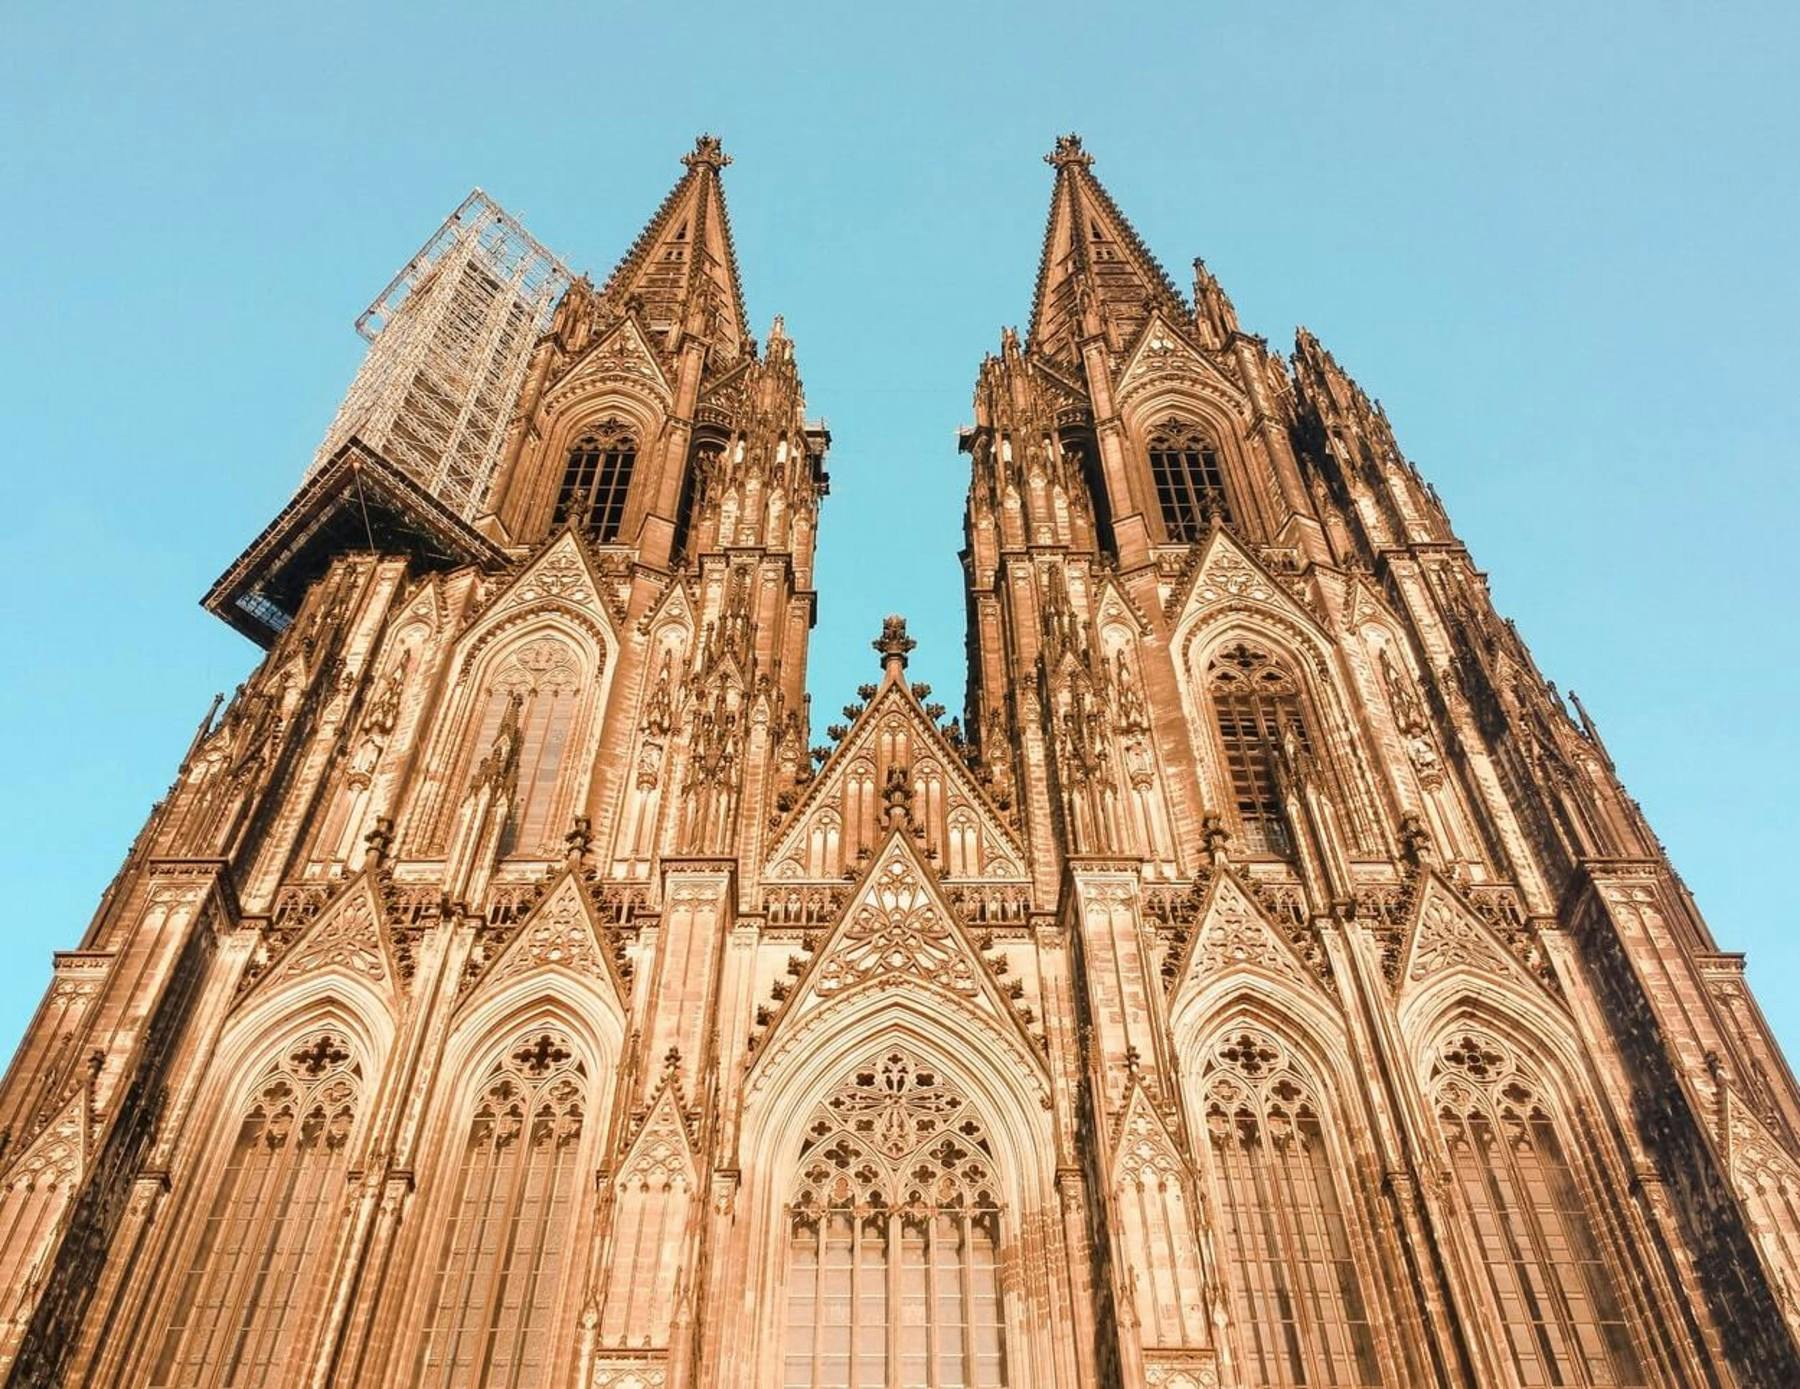 Sightseeings in Cologne: The Cologne Cathedral